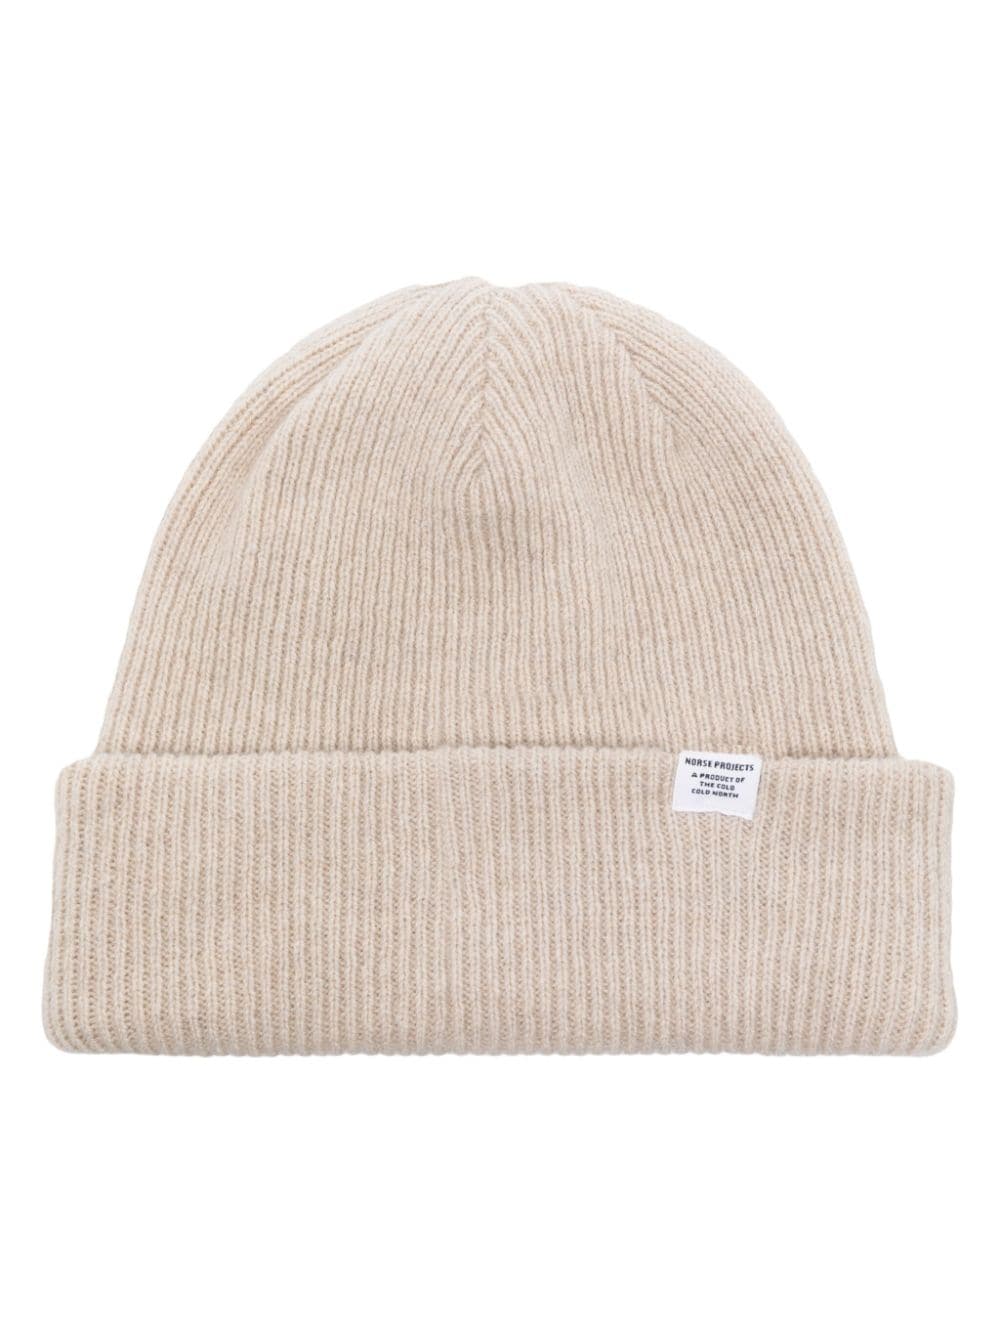 NORSE PROJECTS LOGO-TAG RIBBED WOOL BEANIE